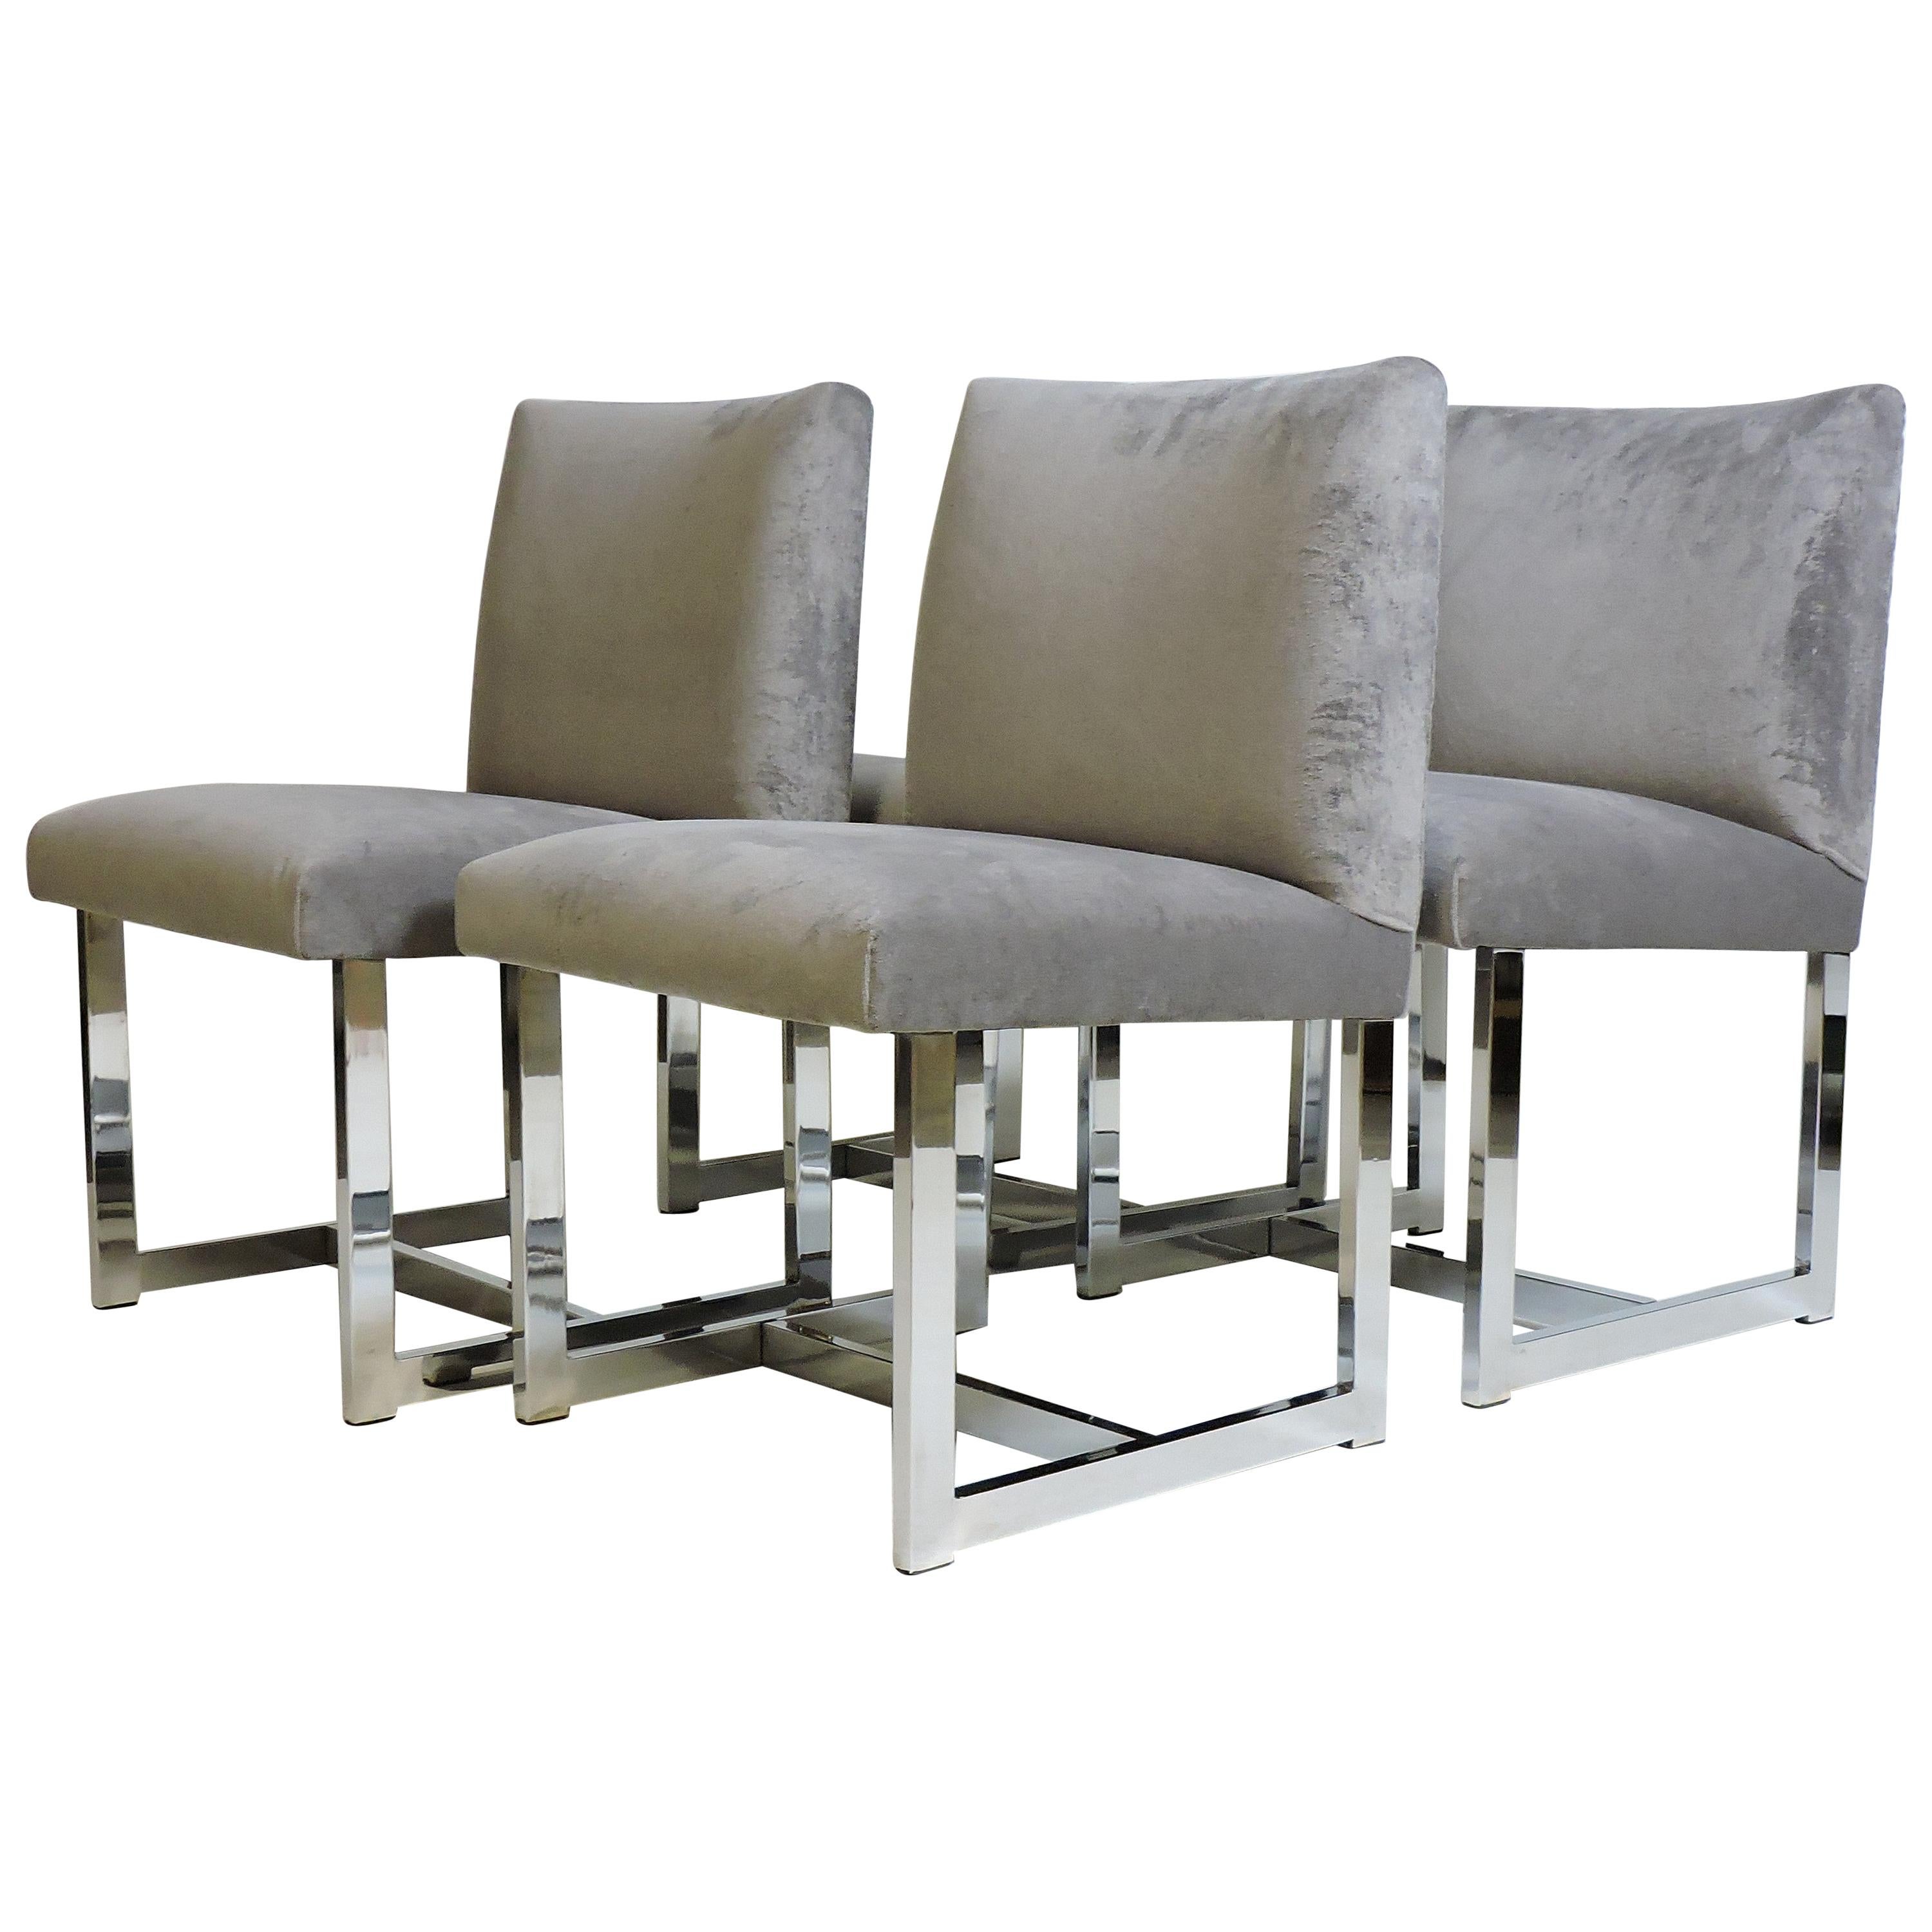 Four Adrian Pearsall Mid-Century Modern Chrome and Velvet Dining Chairs